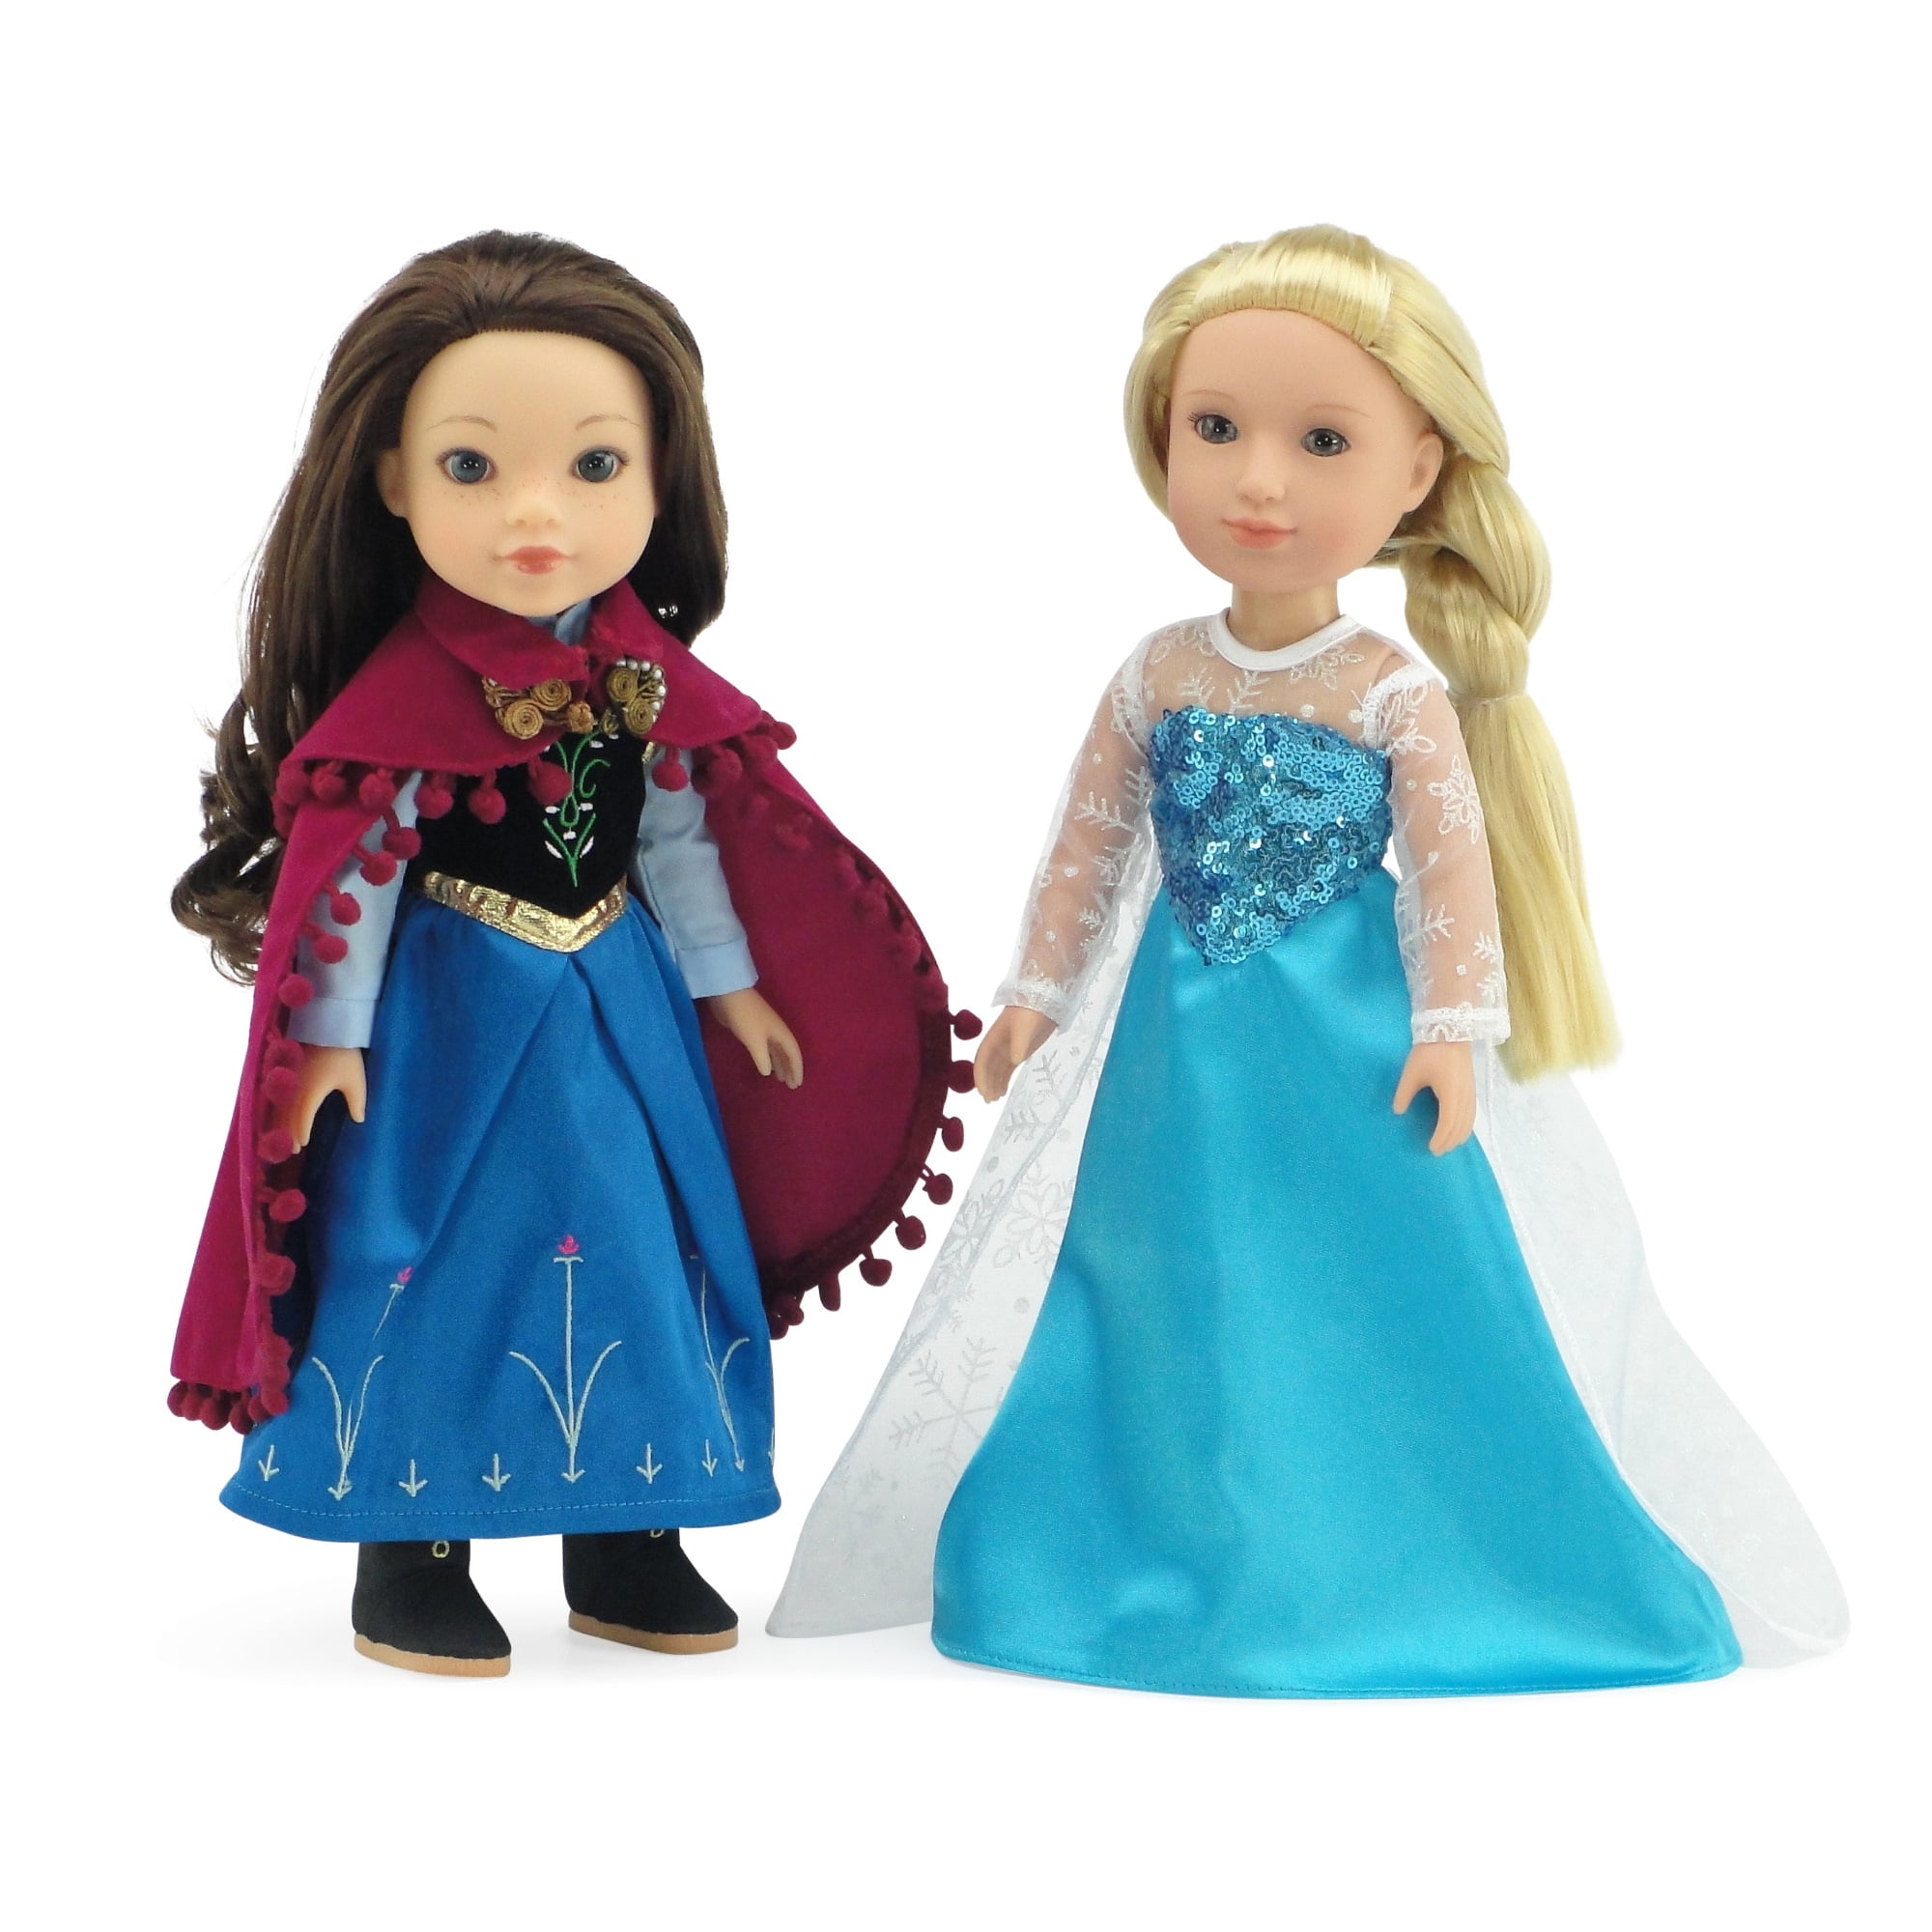 Elsa Dress Frozen Ice Queen Gown USA SELLER fits 18" American Girl Doll Clothes 